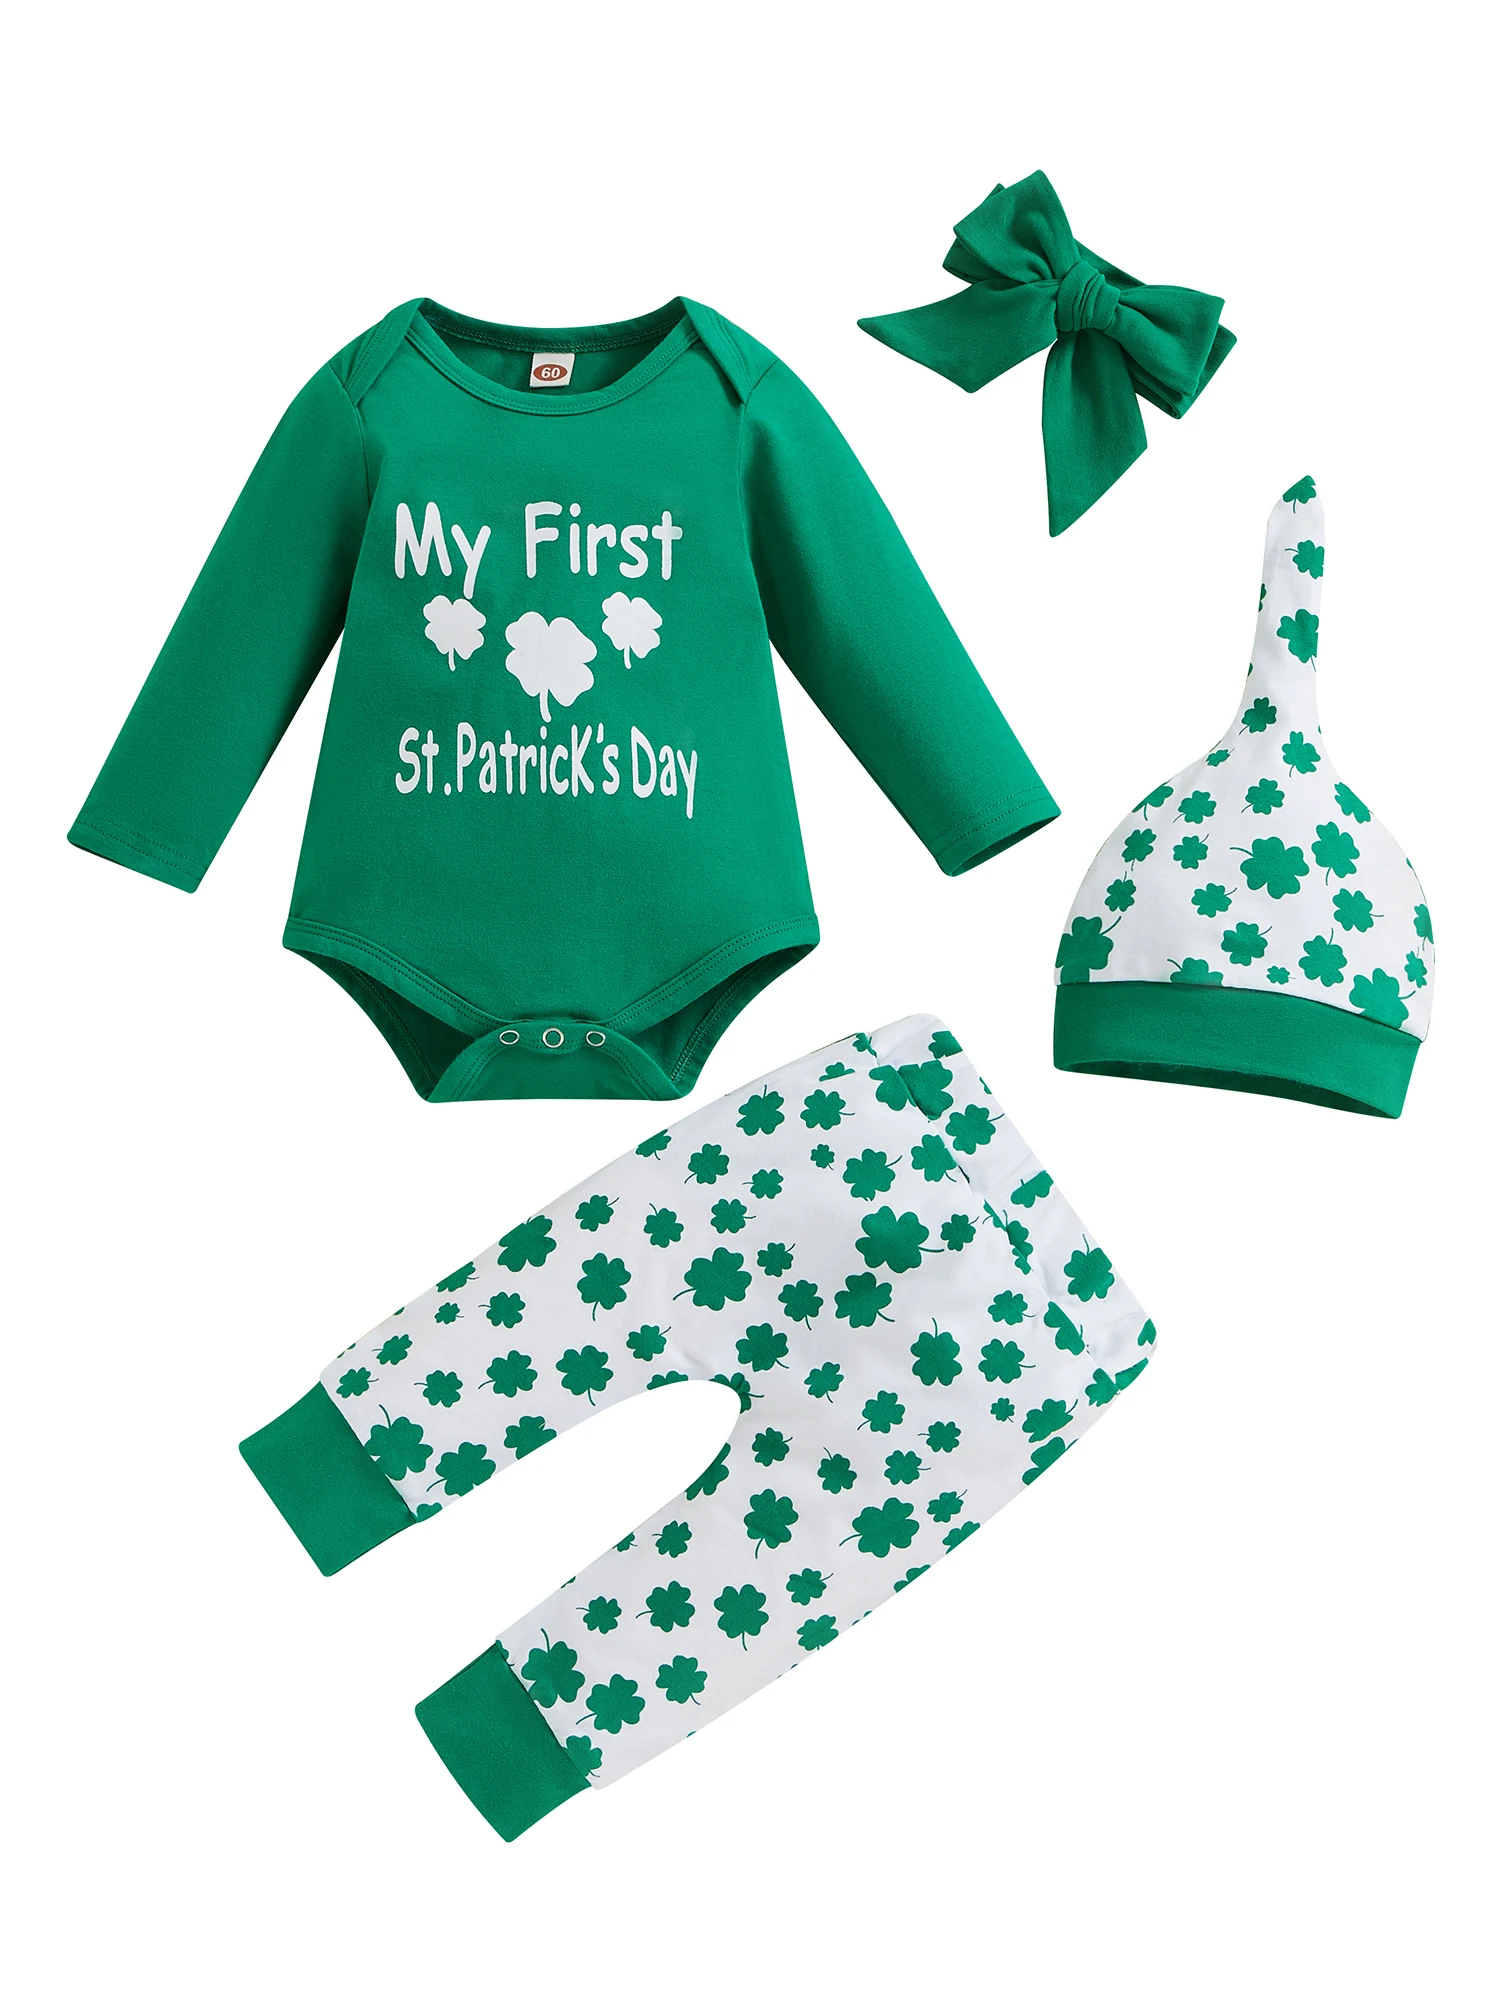 

Baby St Patrick s Day Clothing 3Pcs Set Long Sleeve My 1st St Patrick s Day Romper Bodysuit Four Leaves Clover Long Pants with